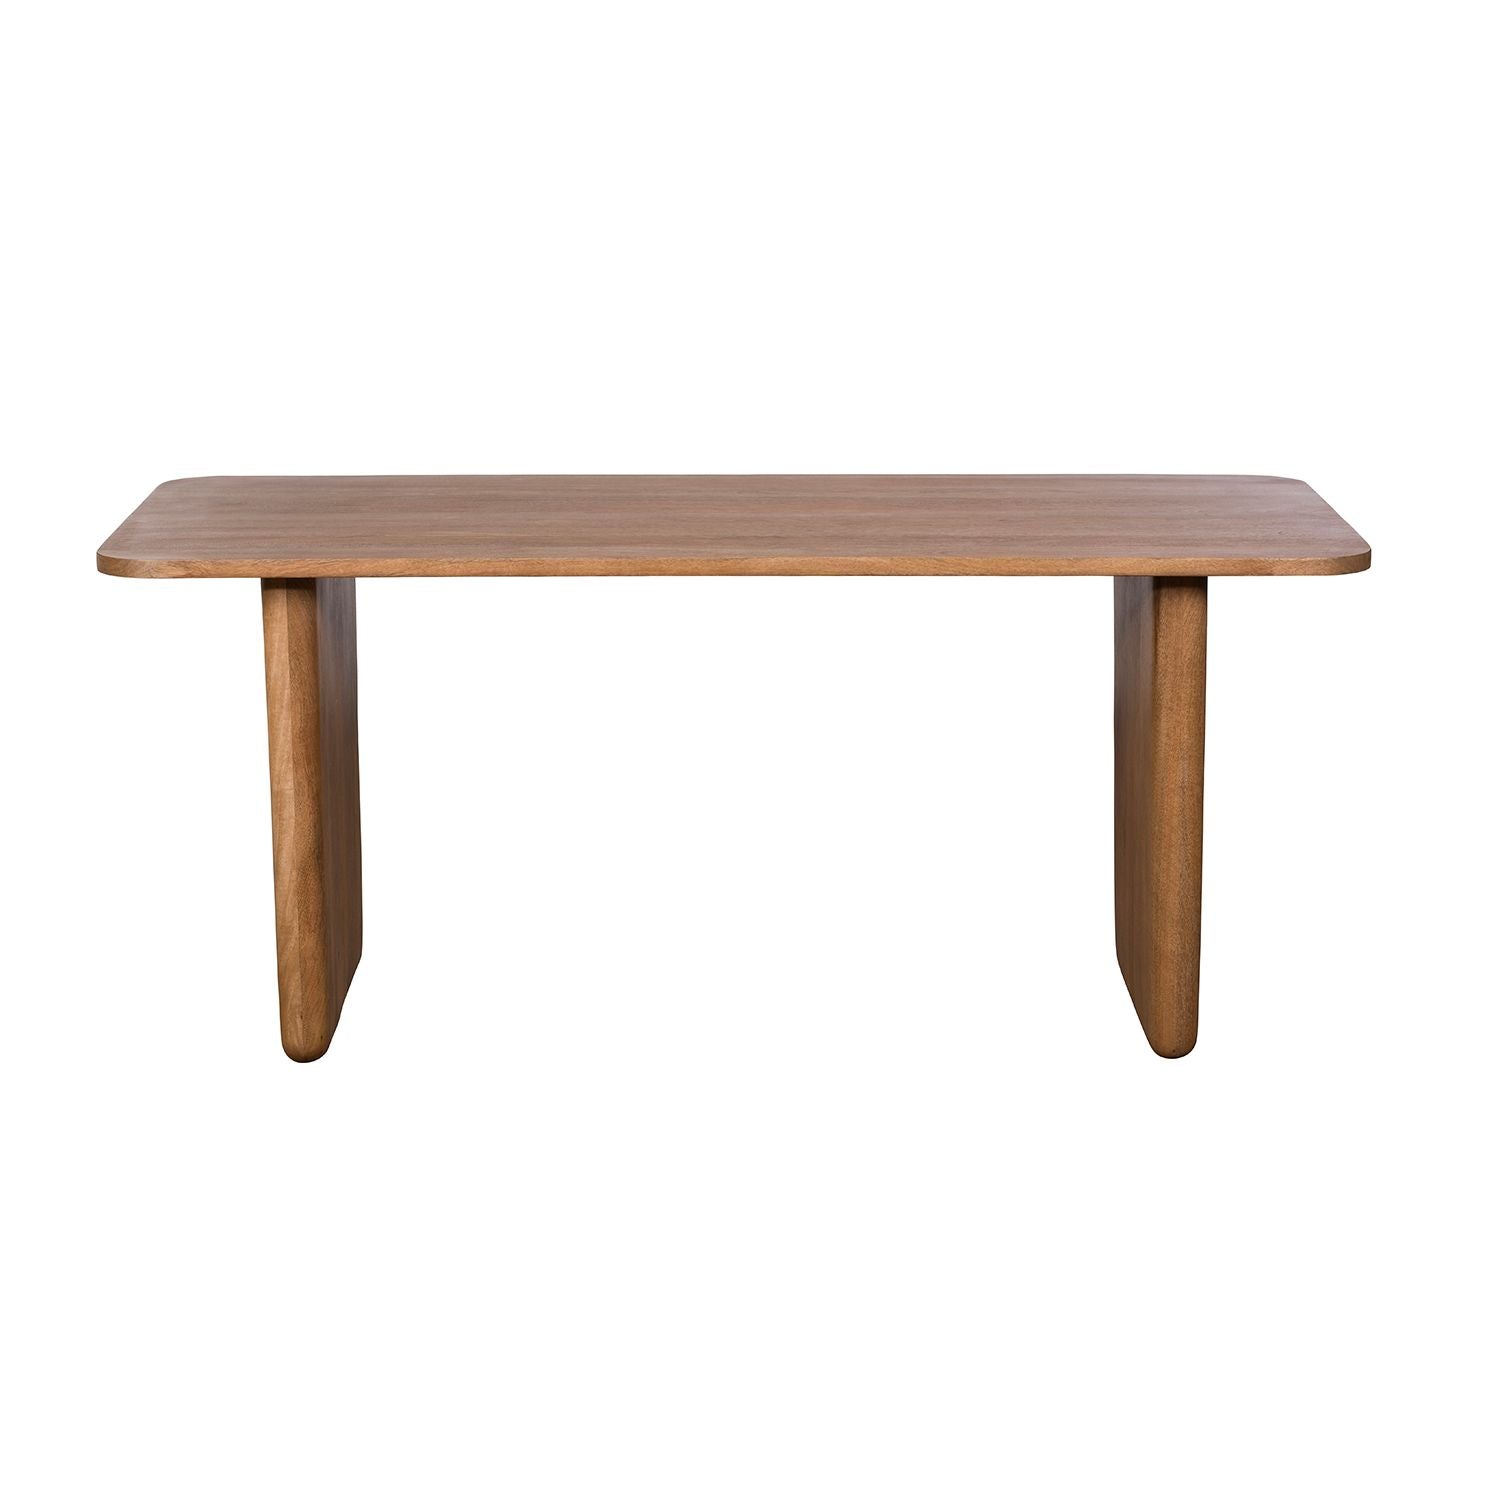  Dining Table - 220cm